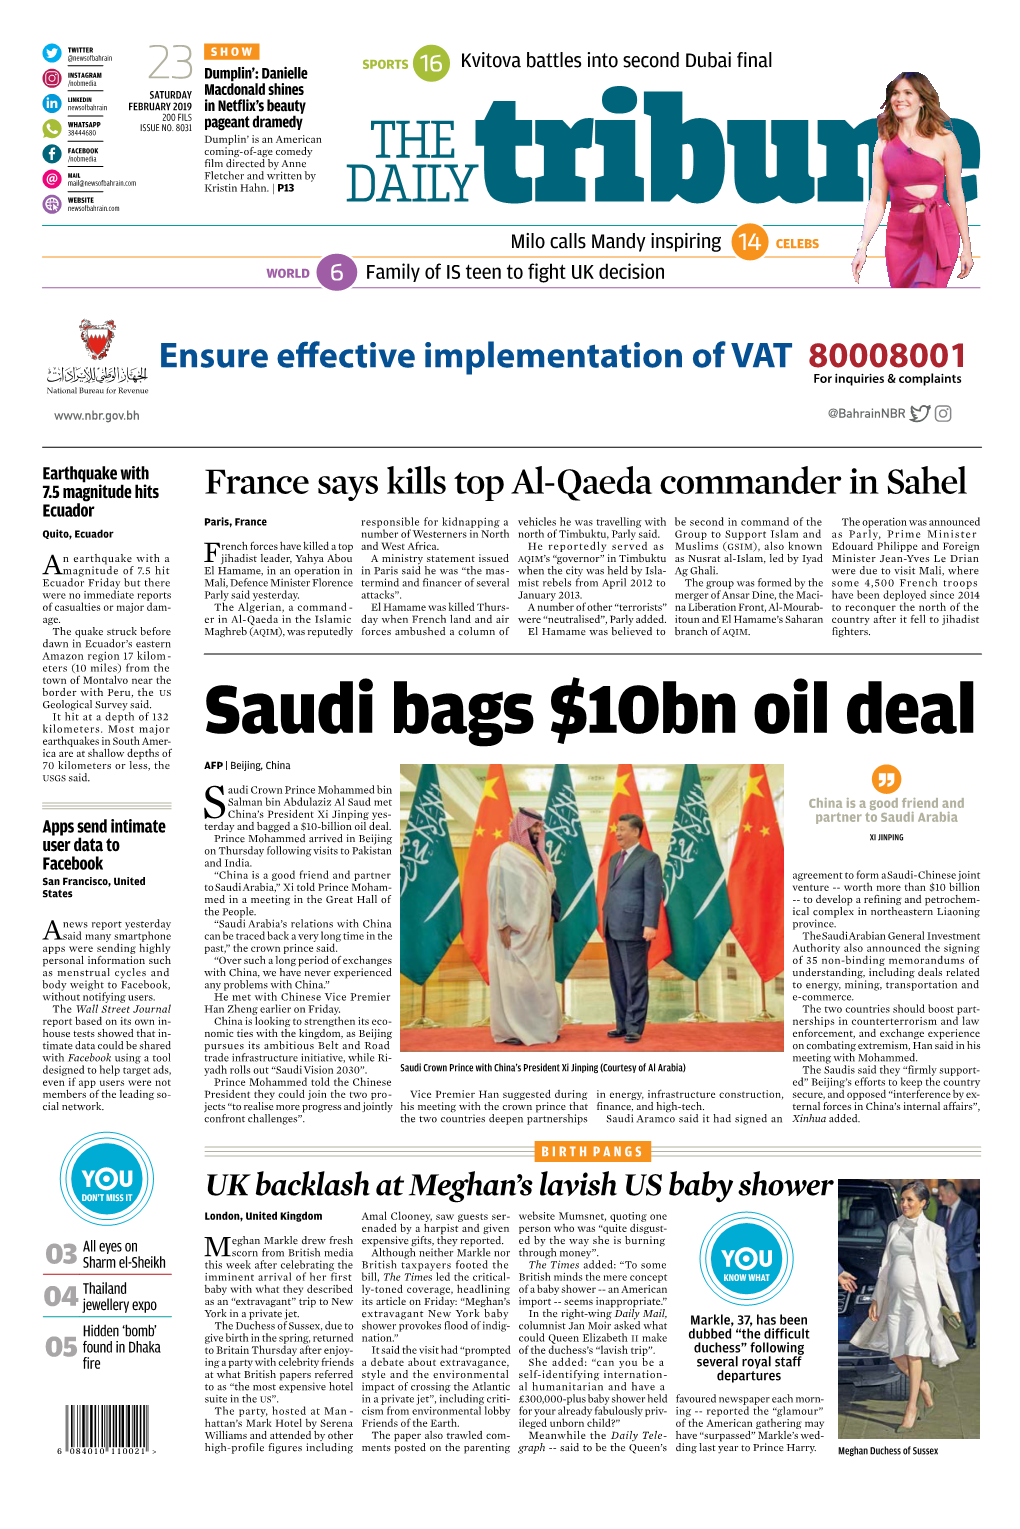 Saudi Bags $10Bn Oil Deal Ica Are at Shallow Depths of 70 Kilometers Or Less, the AFP | Beijing, China USGS Said